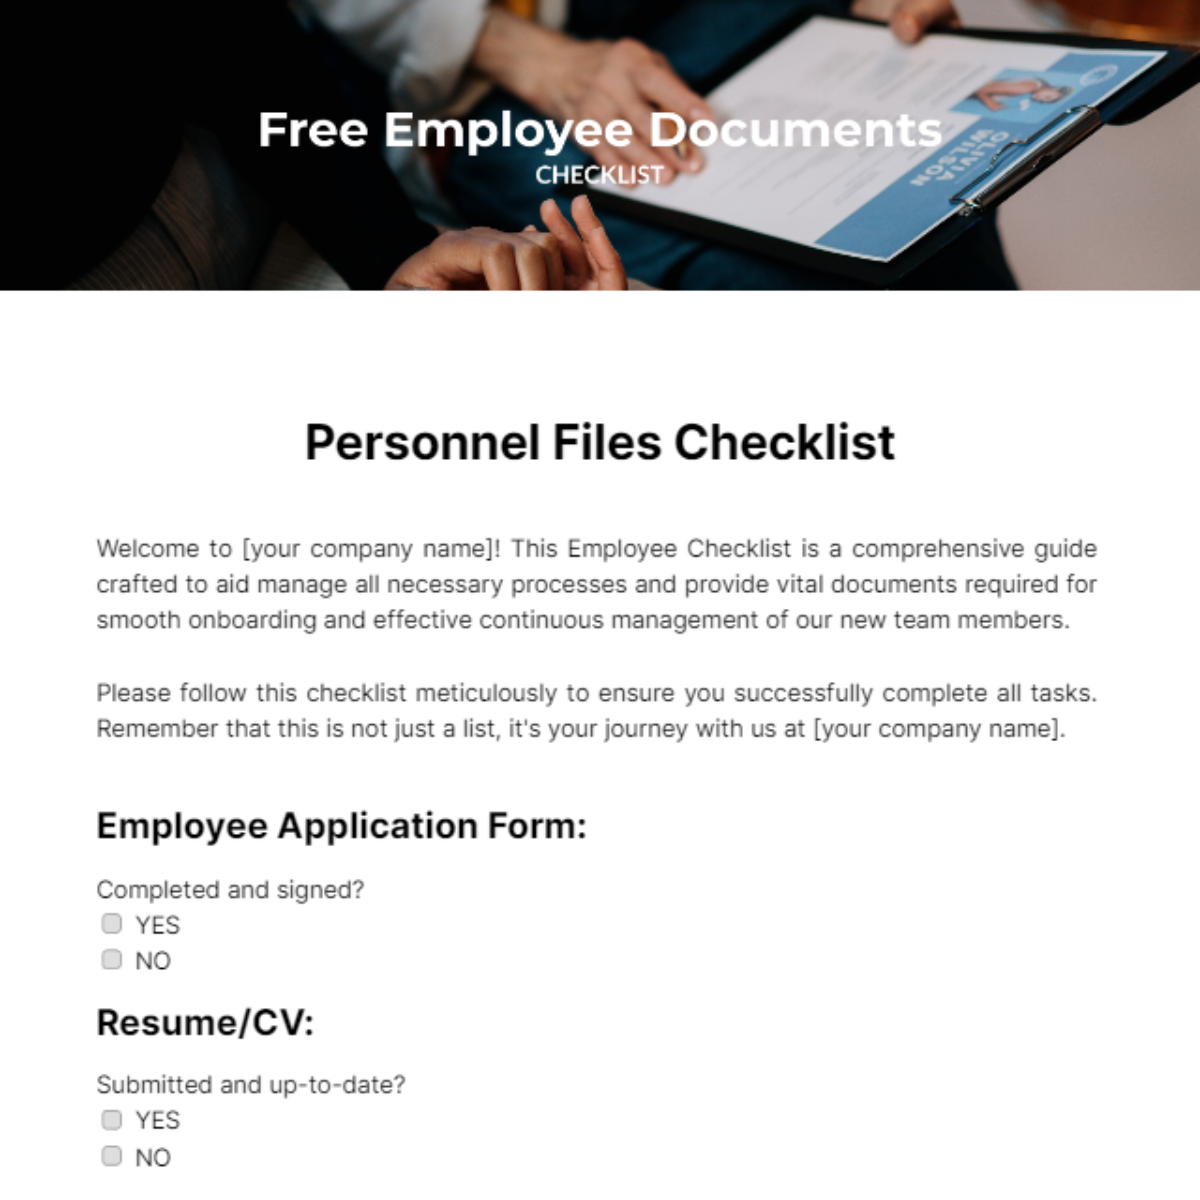 Free Employee Documents Checklist Template